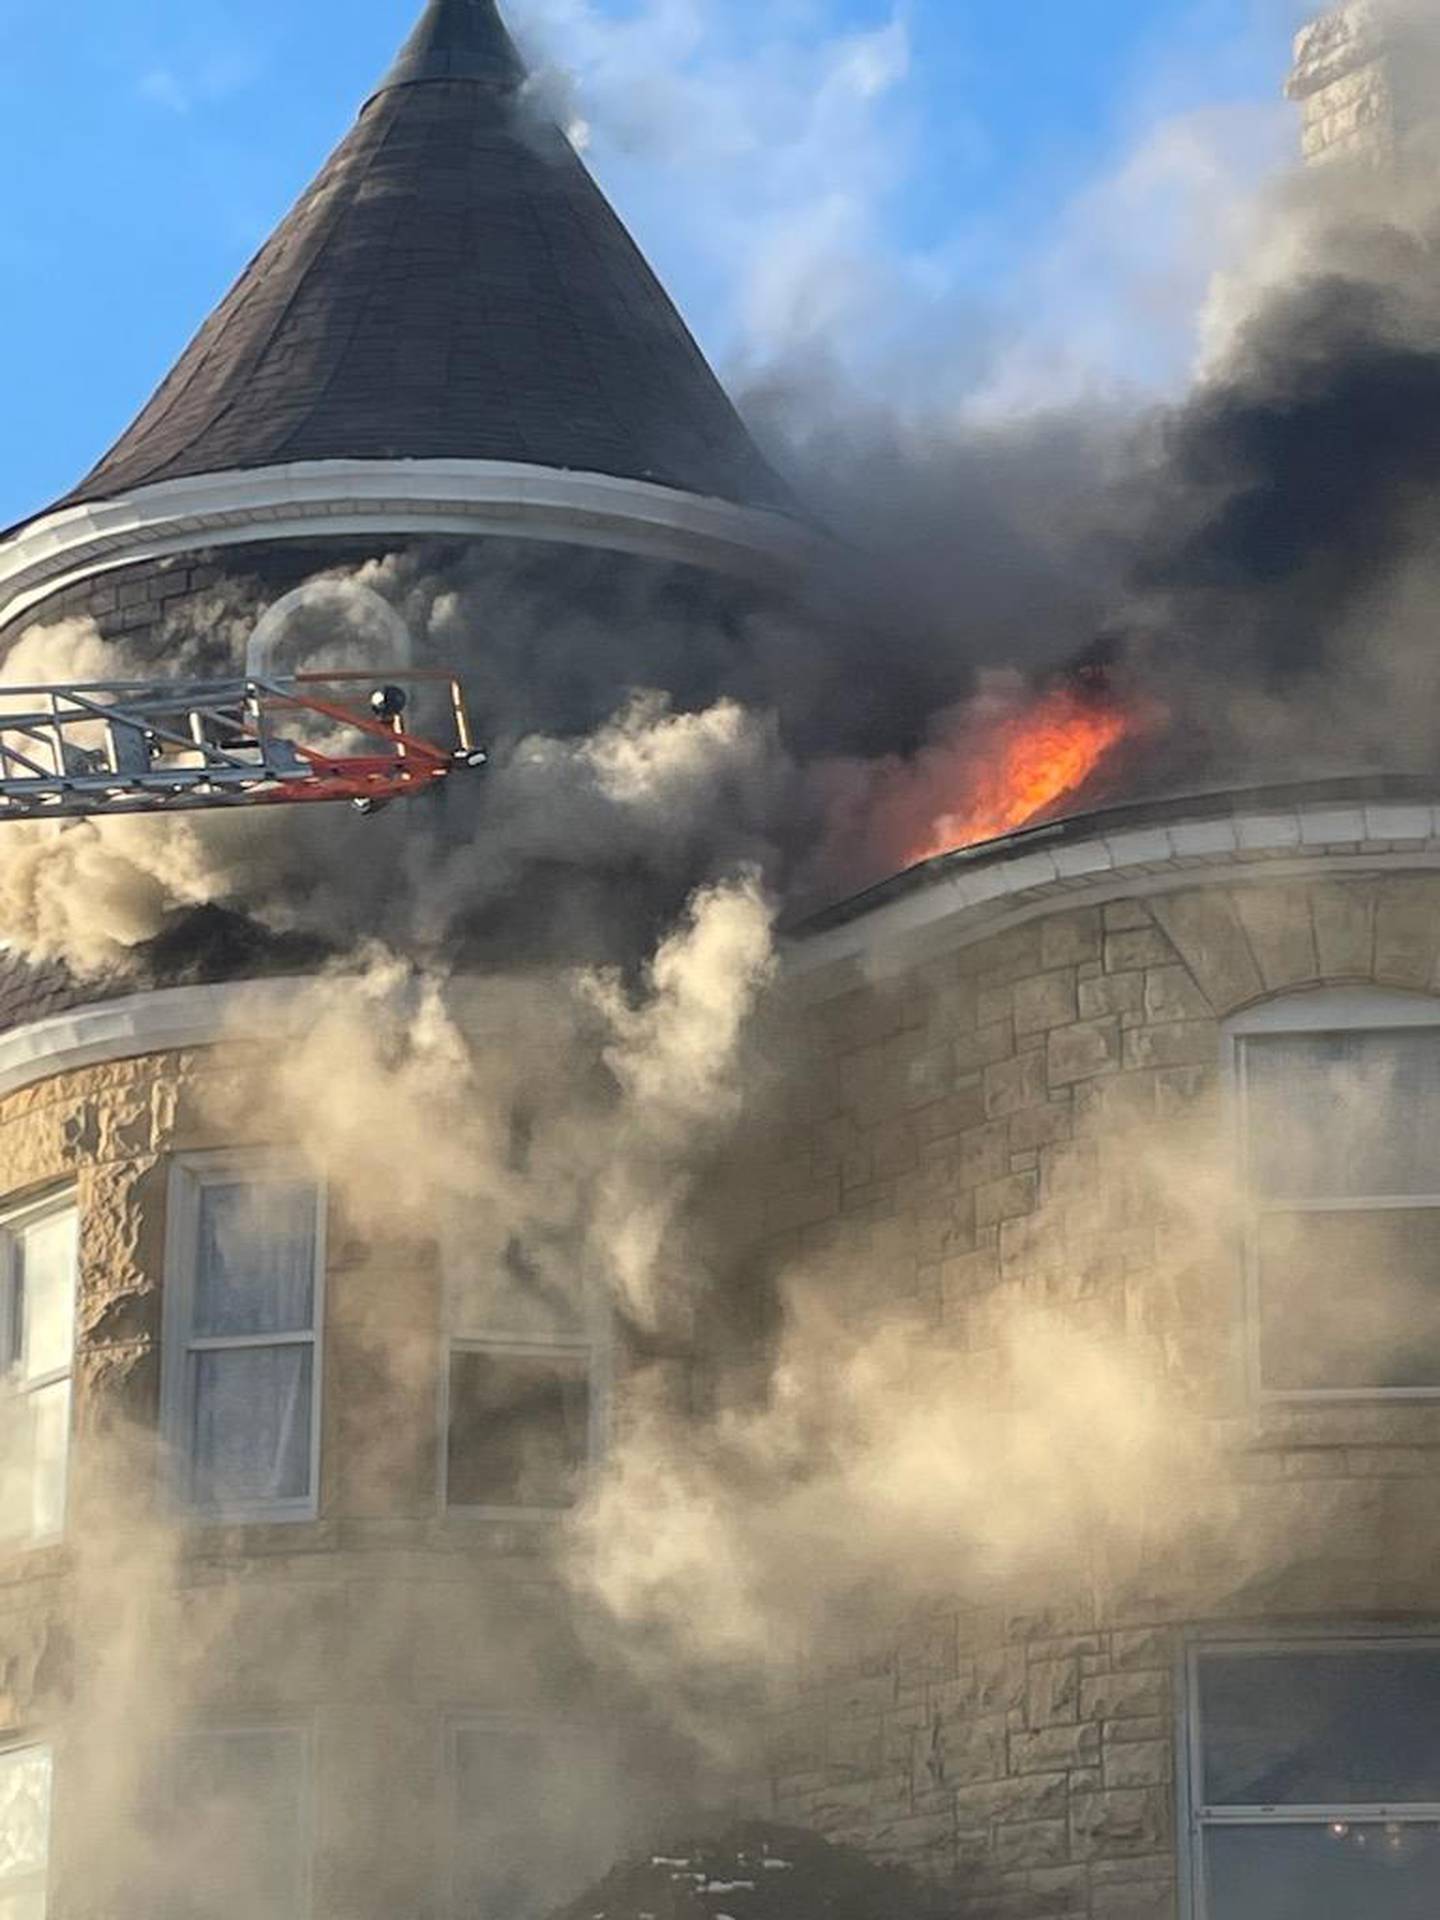 A fire broke out Wednesday afternoon at the Patrick Haley Mansion, located at 17 S. Center St.  in Joliet. Joliet firefighters brought the fire under control in 40 minutes. No inured were reported. The fire is under investigation.